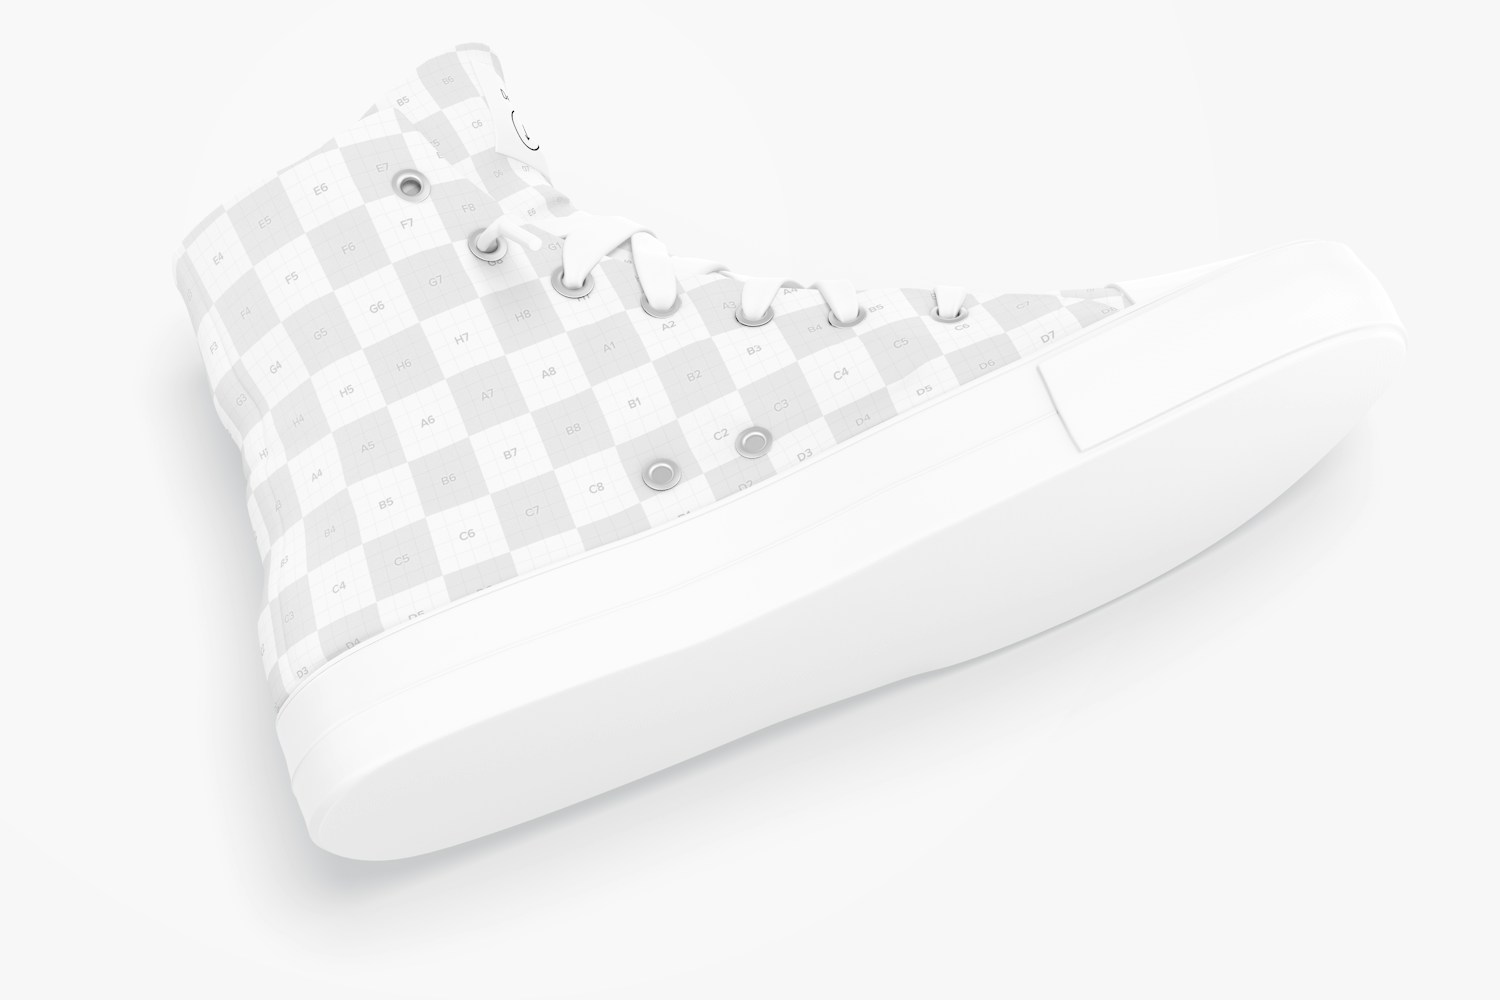 Sneakers Mockup, Dropped